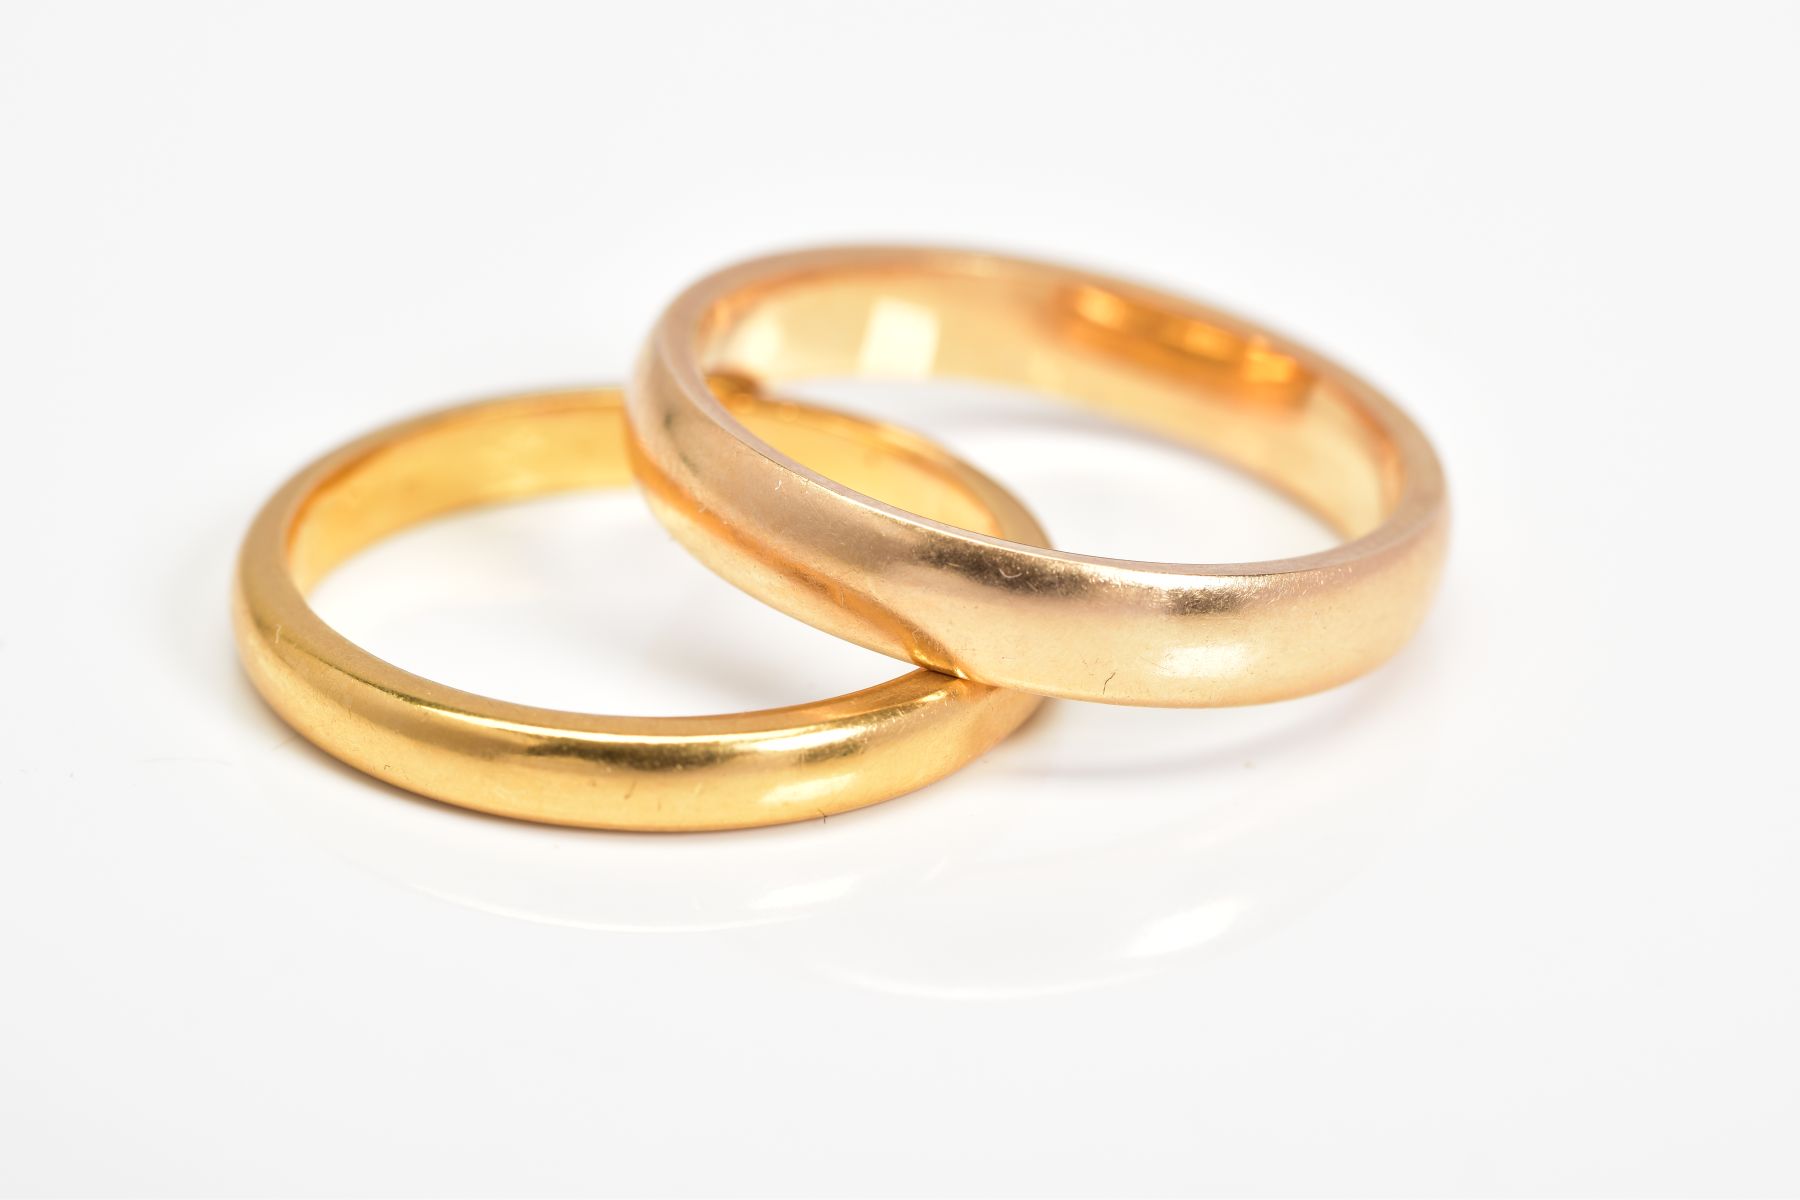 AN 18CT GOLD BAND RING AND A 22CT GOLD BAND RING, both of plain design, both with hallmarks, 18ct